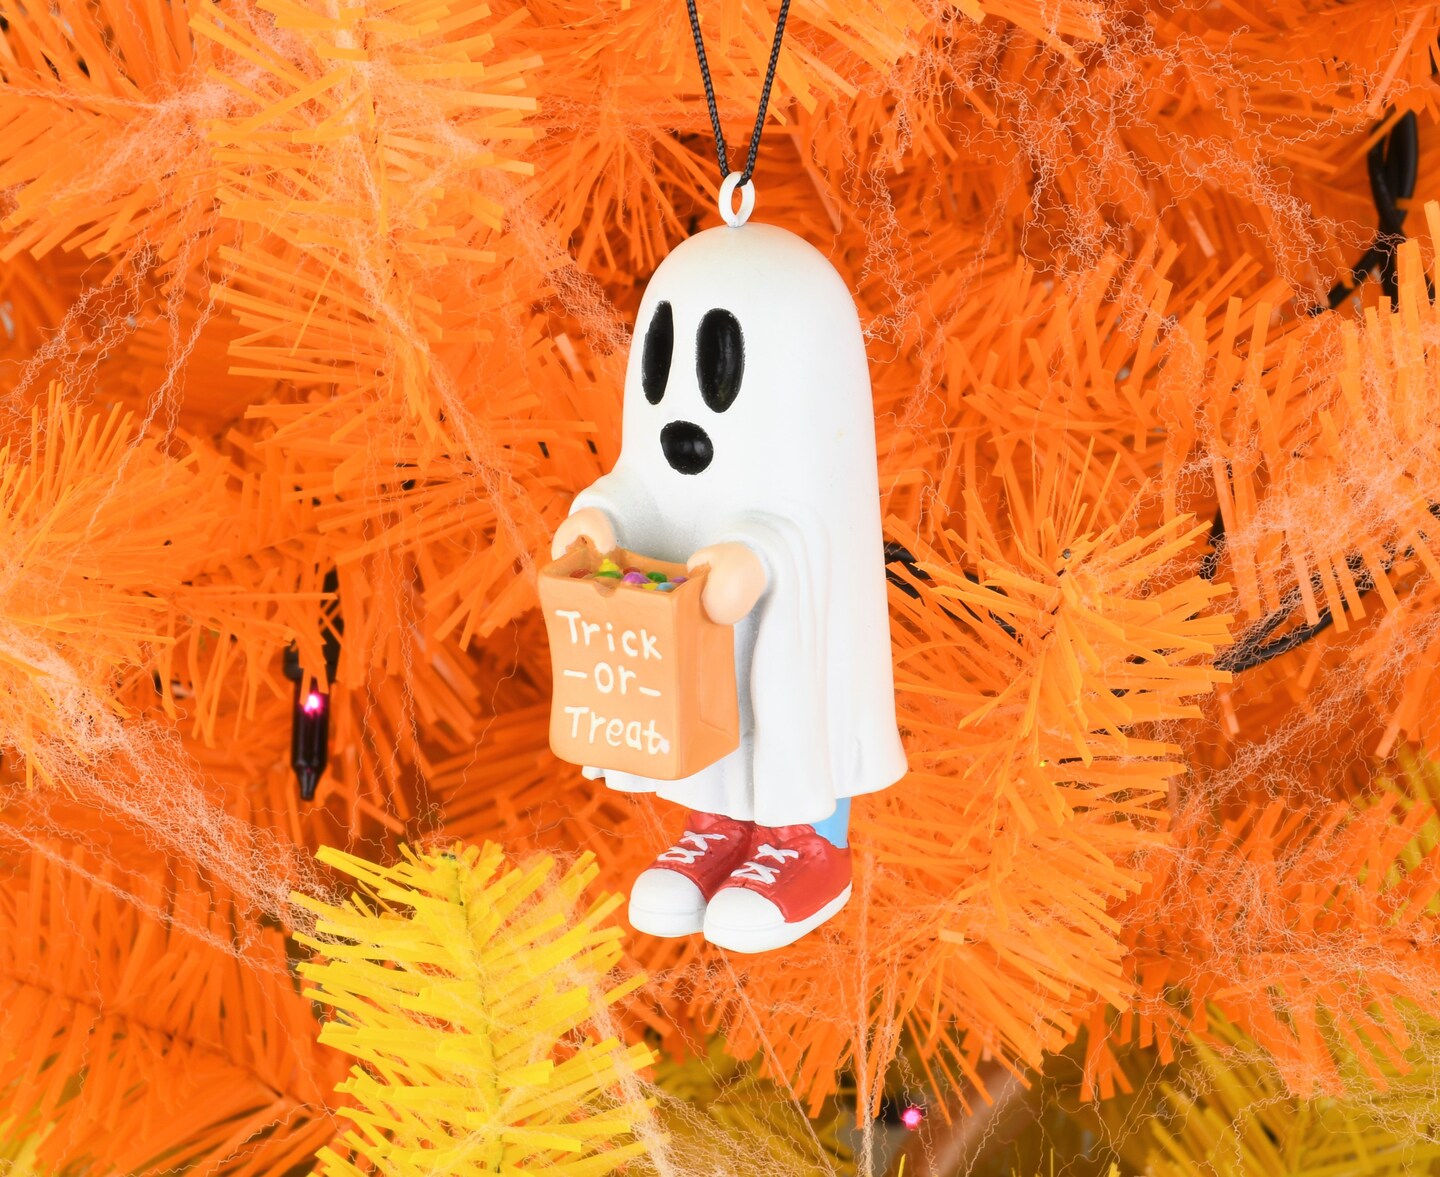 Trick or Treating Kid in Ghost Costume Halloween Ornaments